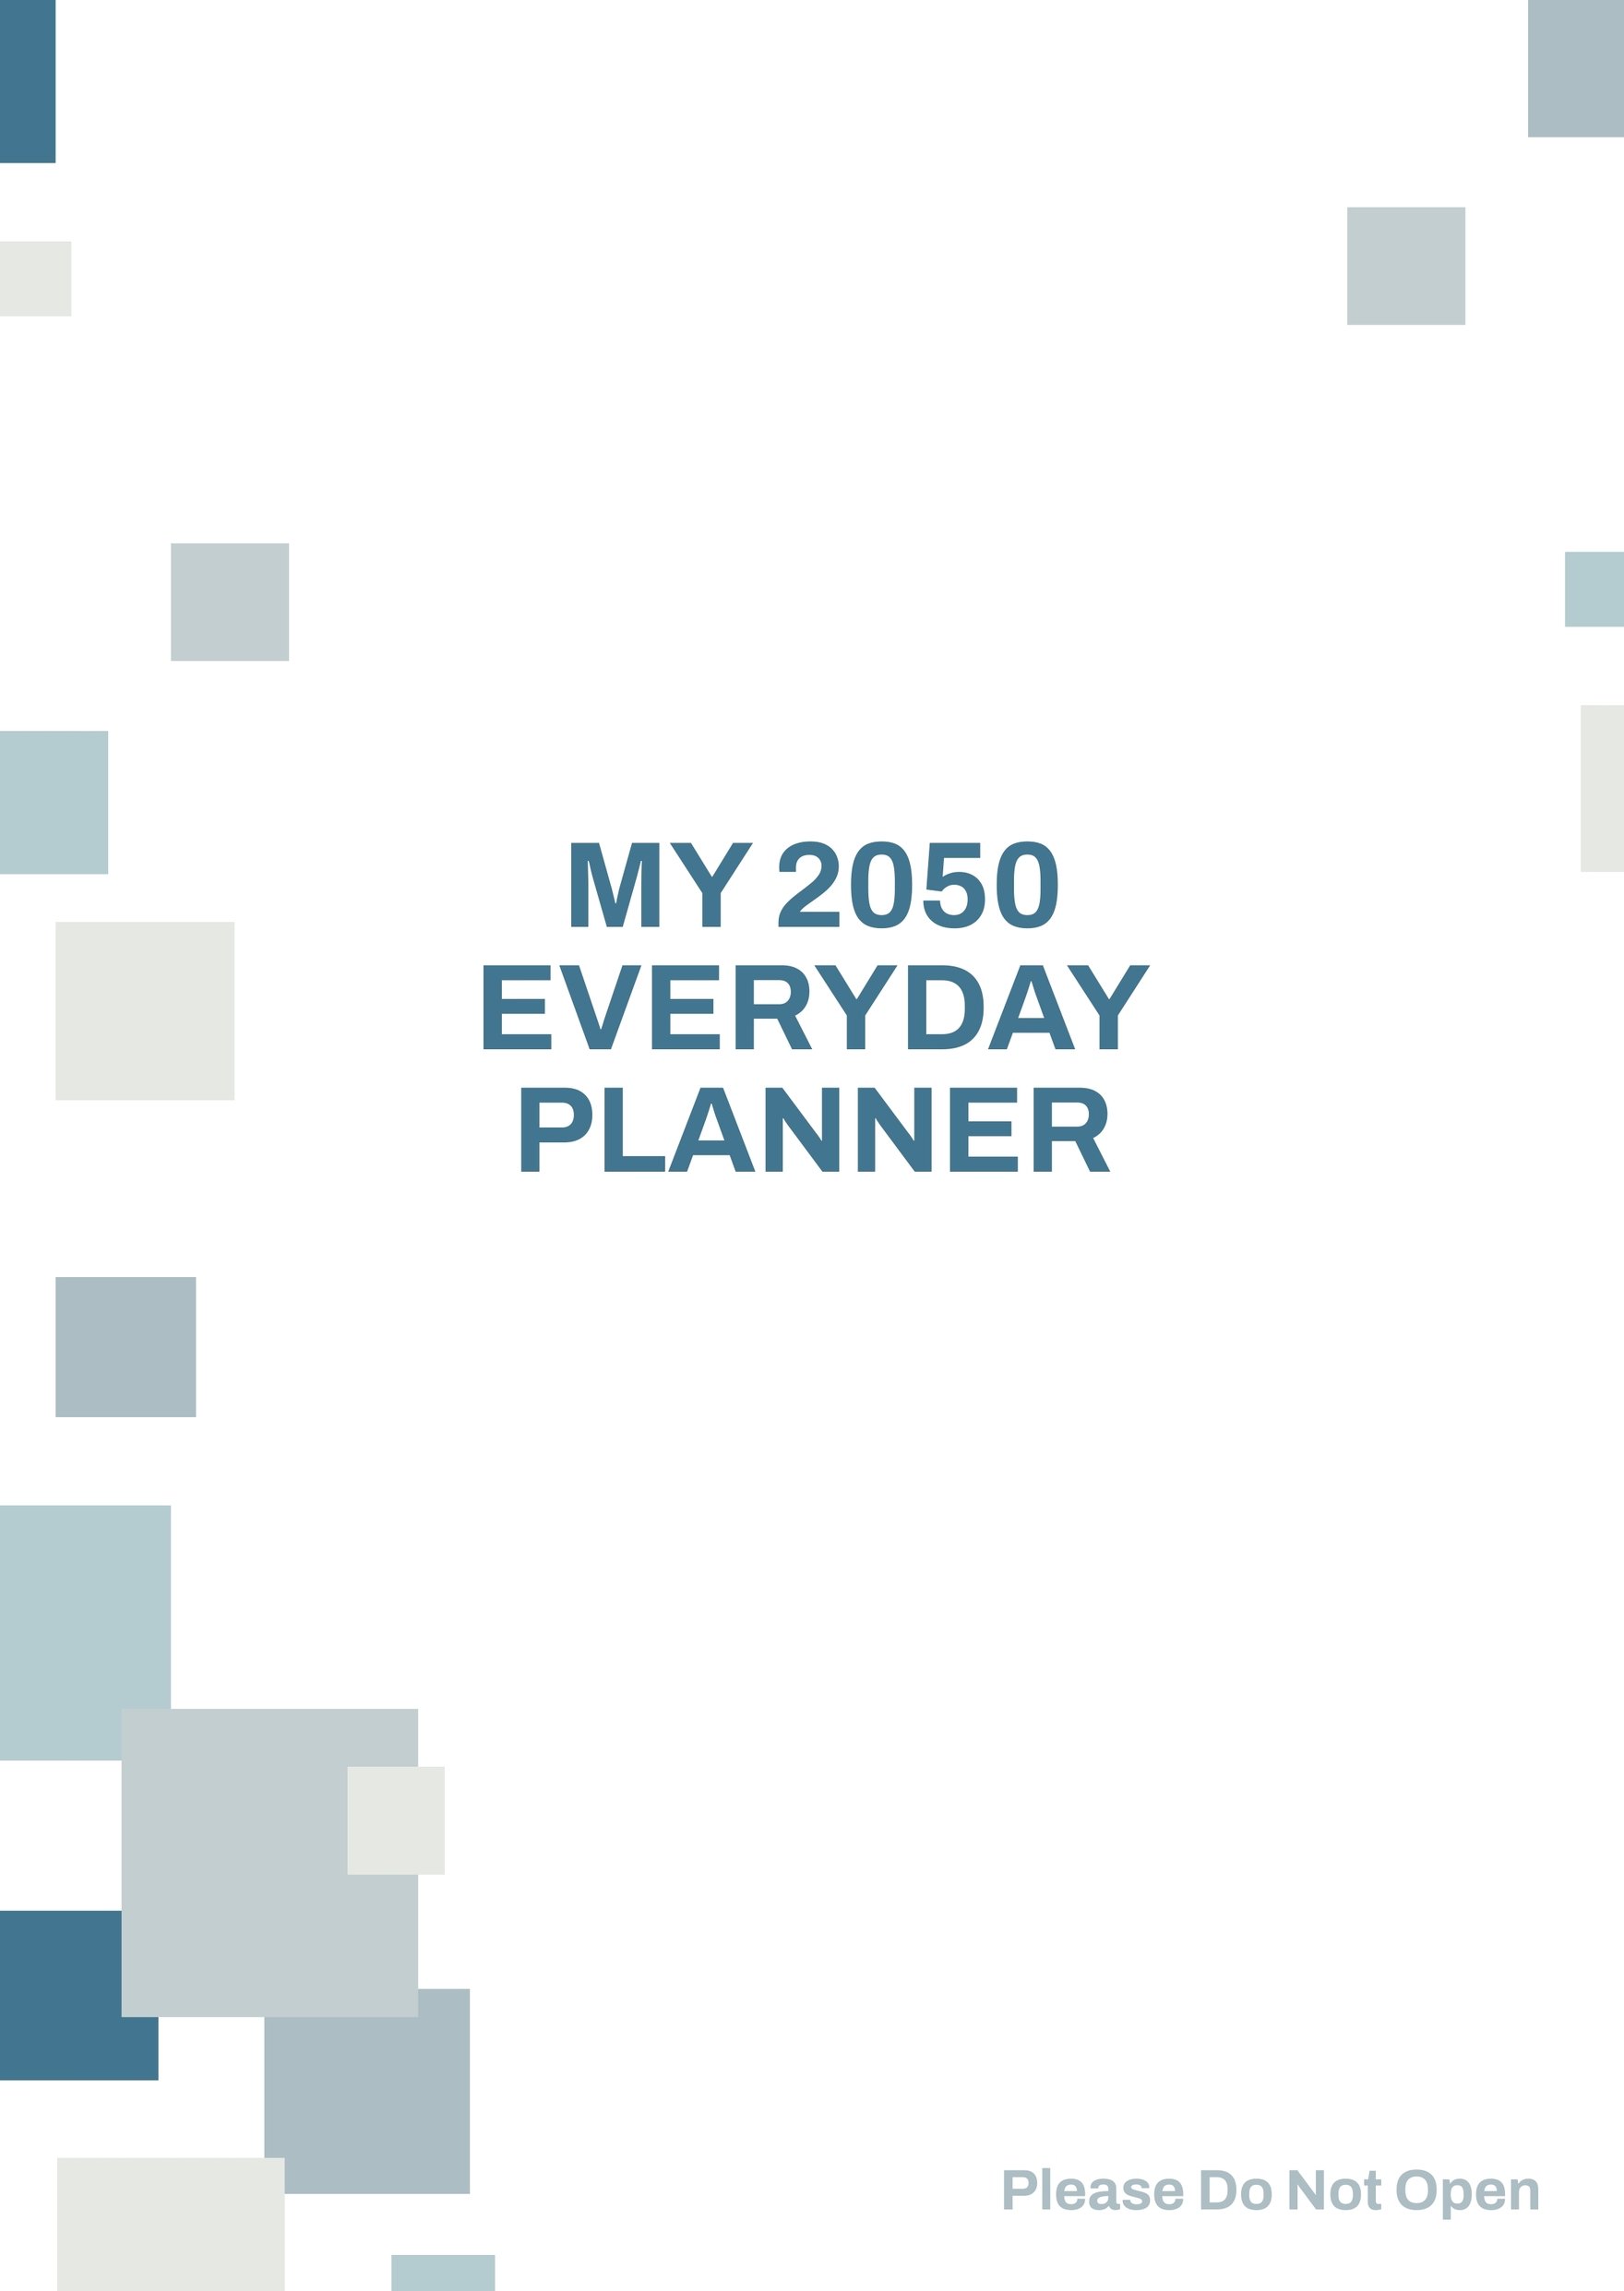 Free Personal Planner Cover Template in Word, Google Docs, PDF